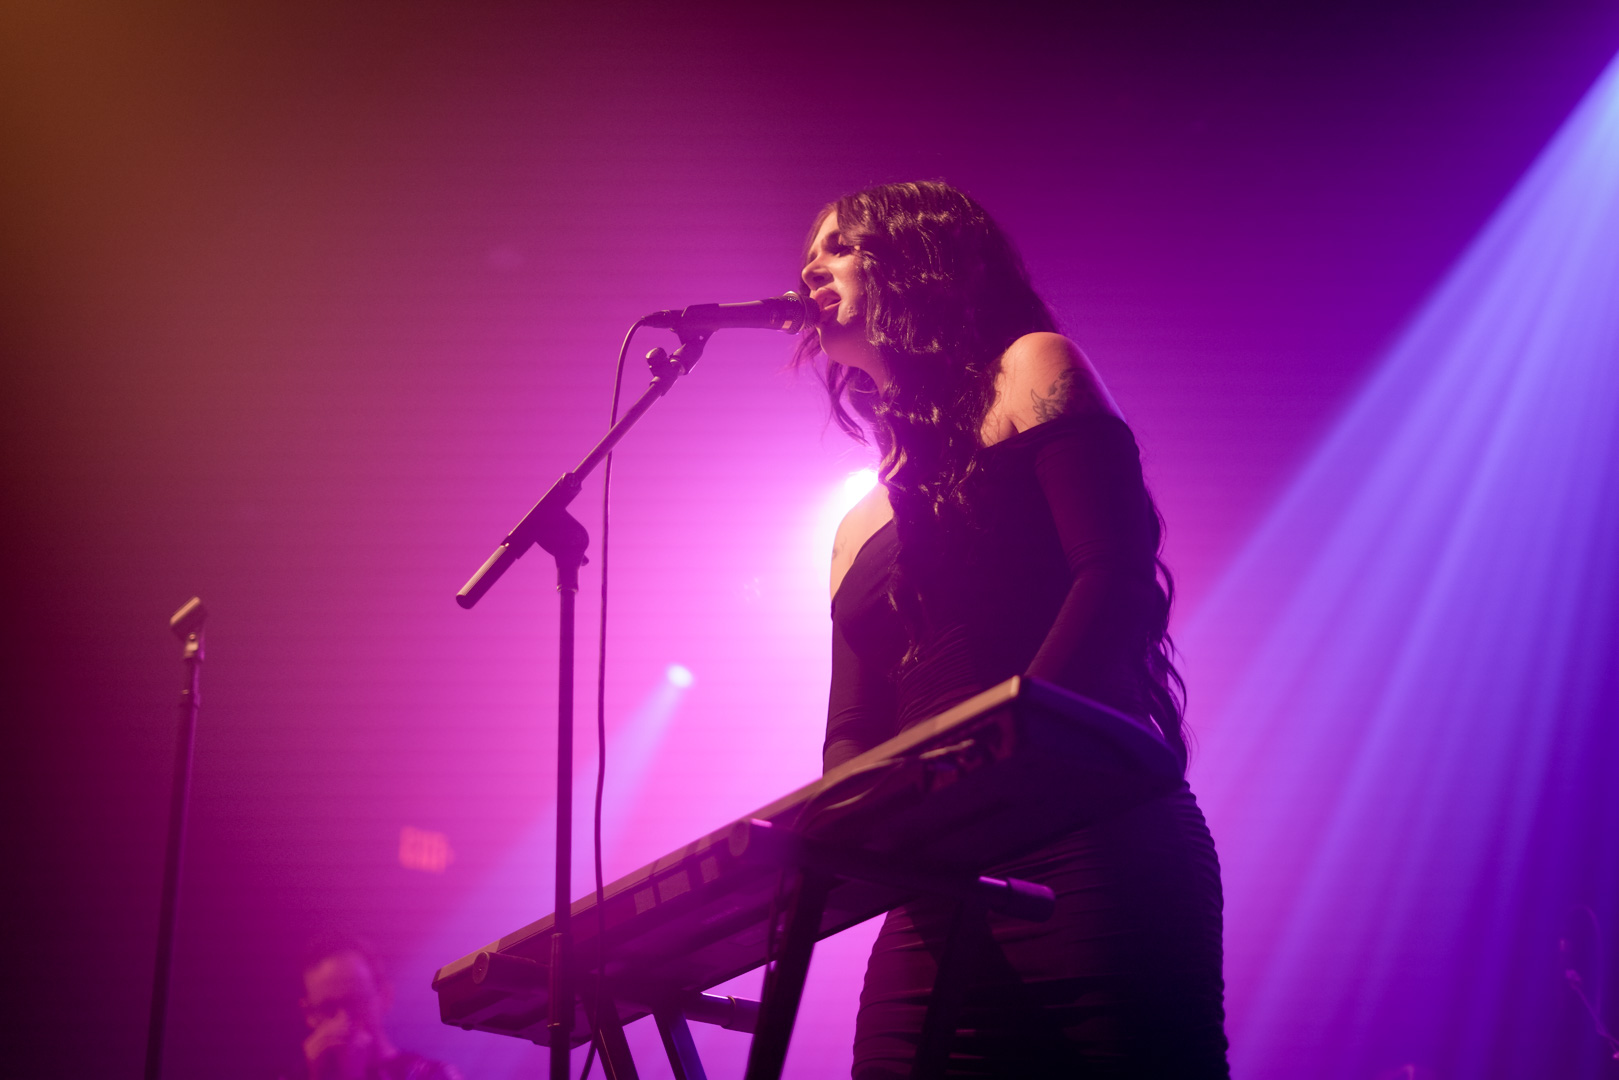 A woman plays keyboard and sings on stage